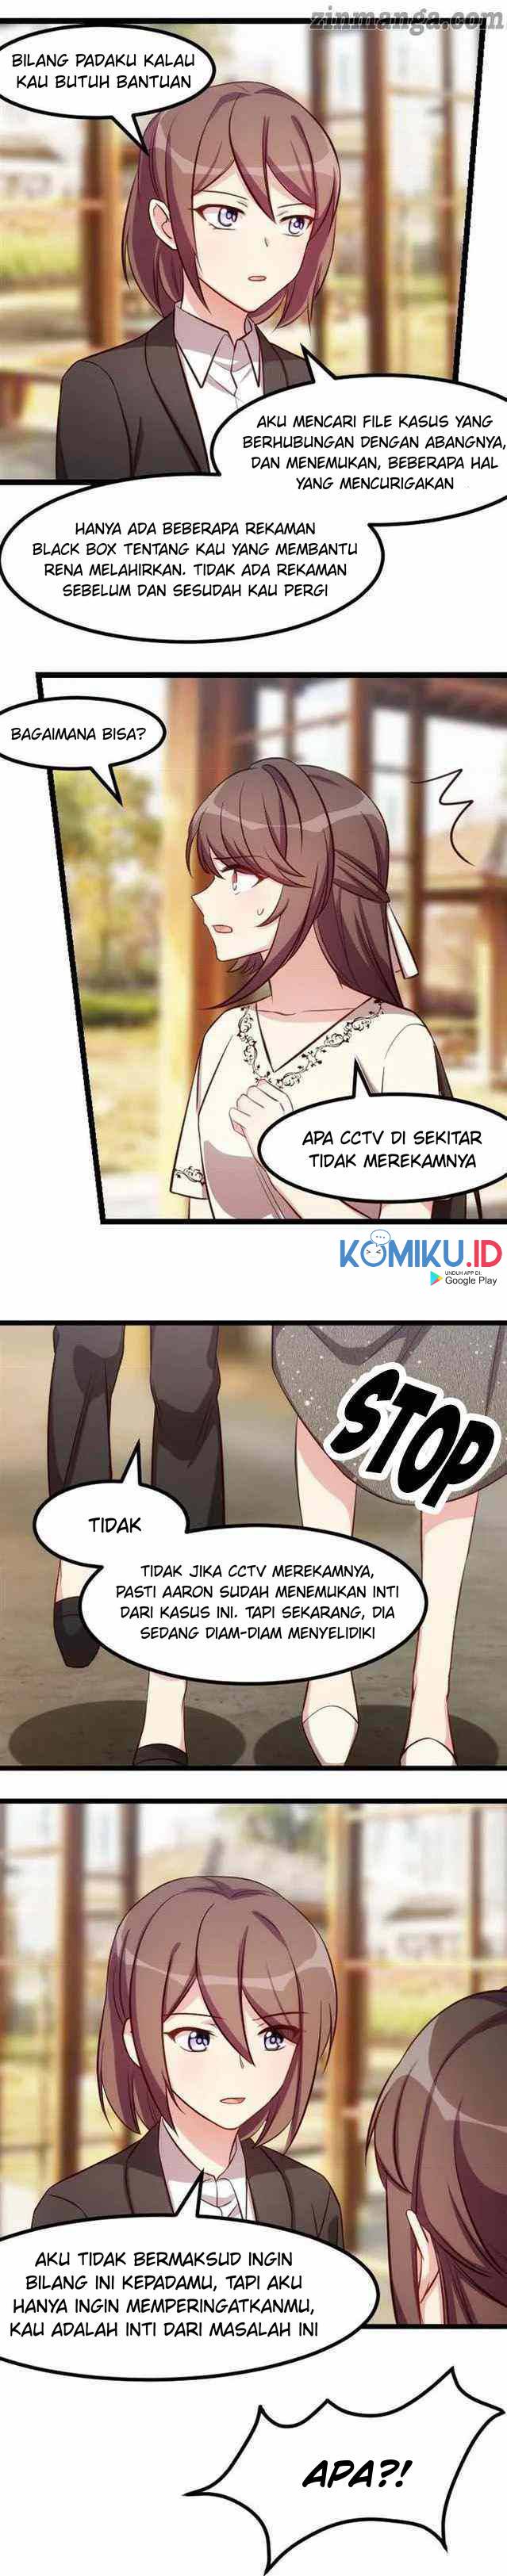 CEO’s Sudden Proposal Chapter 219 2